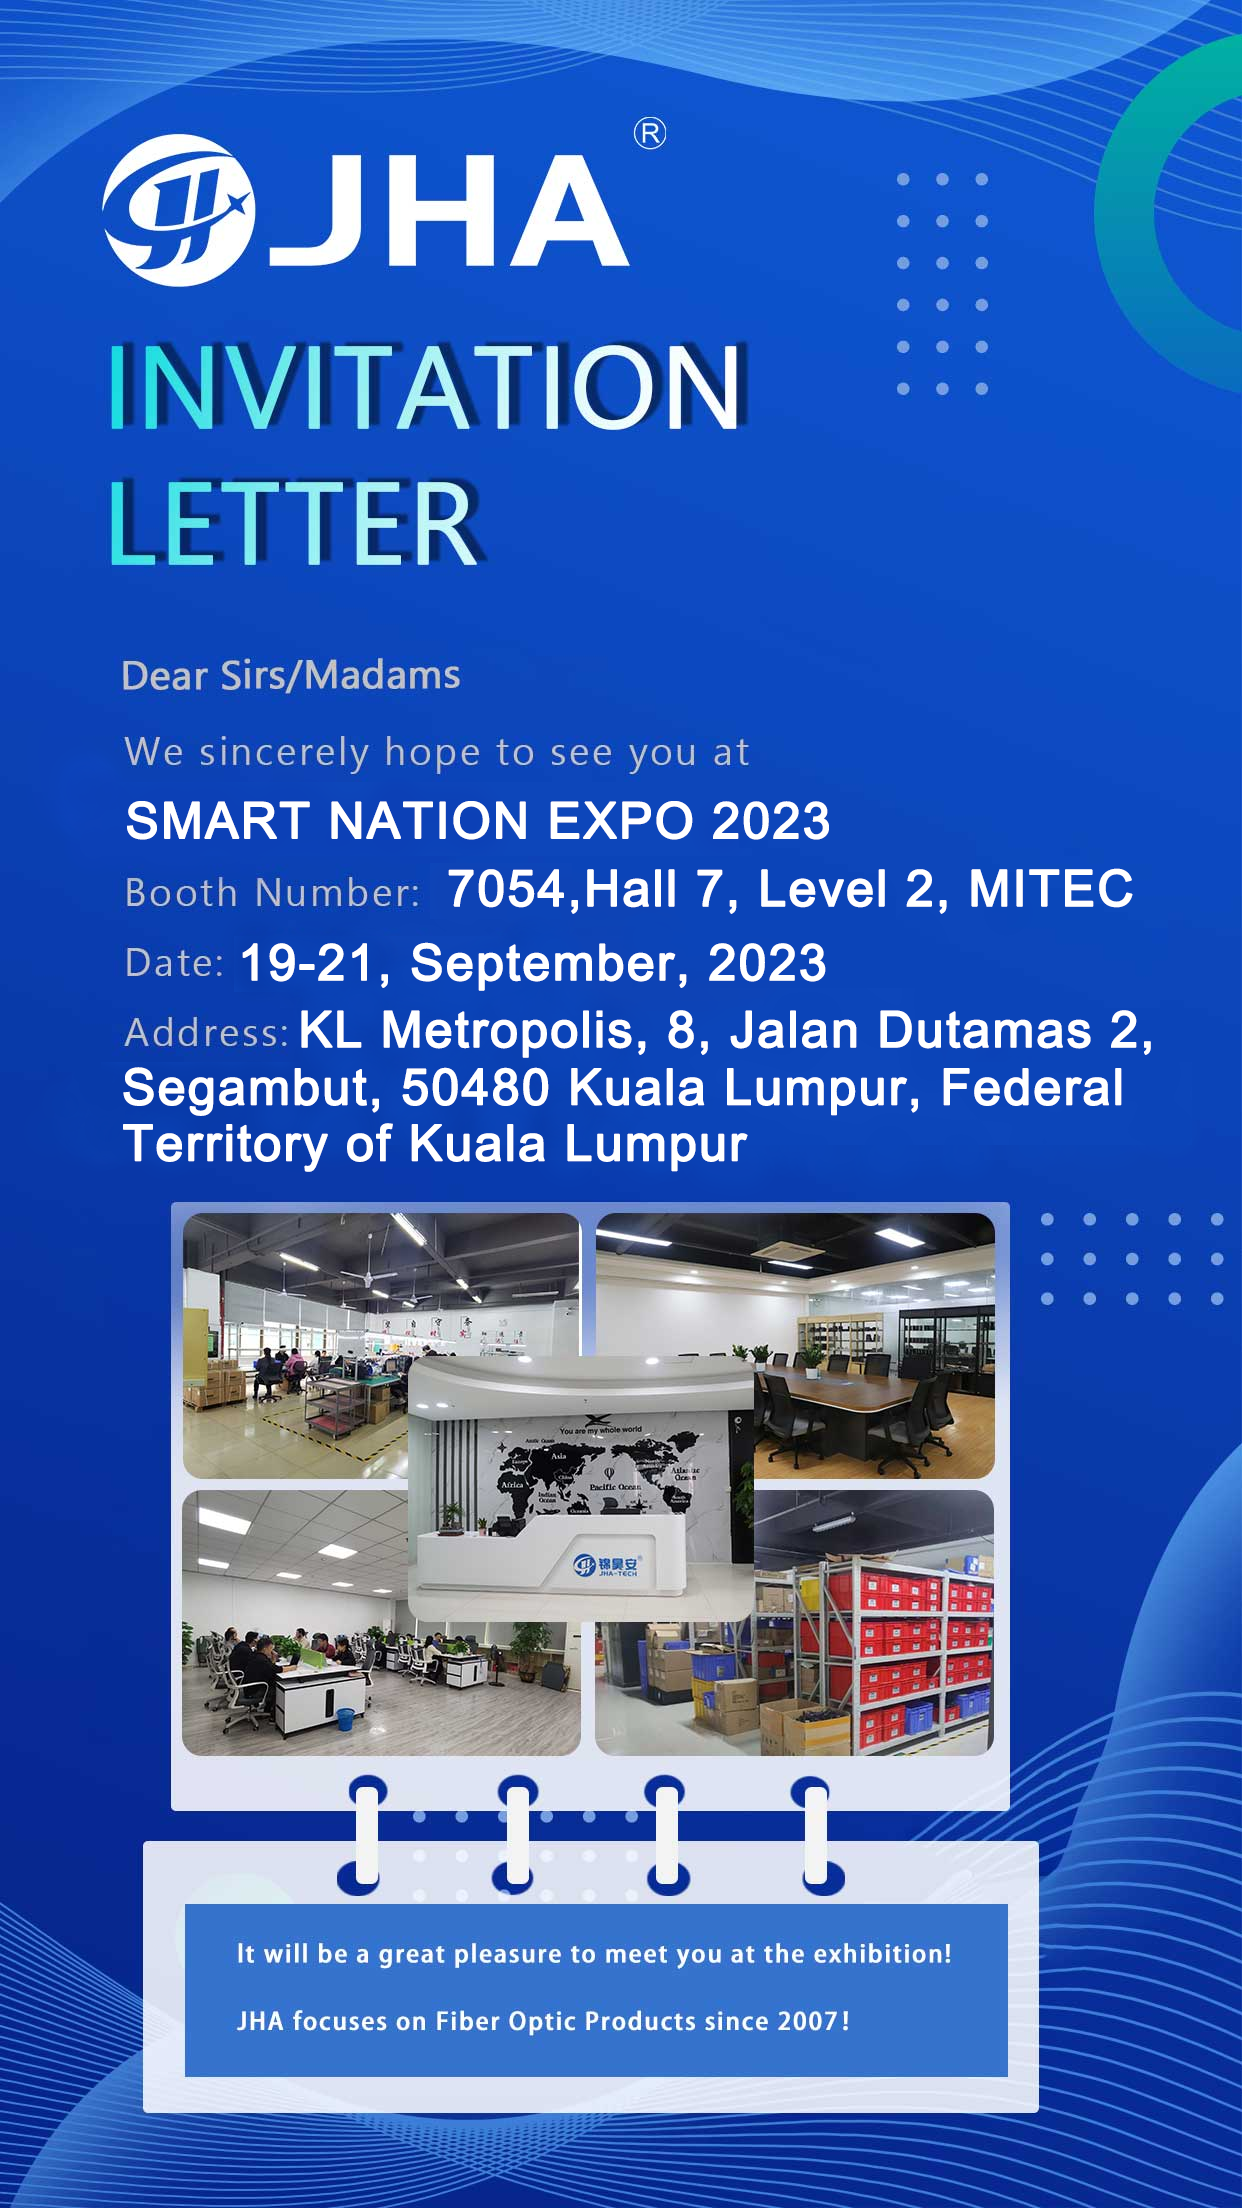 Let’s see you at SMART NATION EXPO 2023